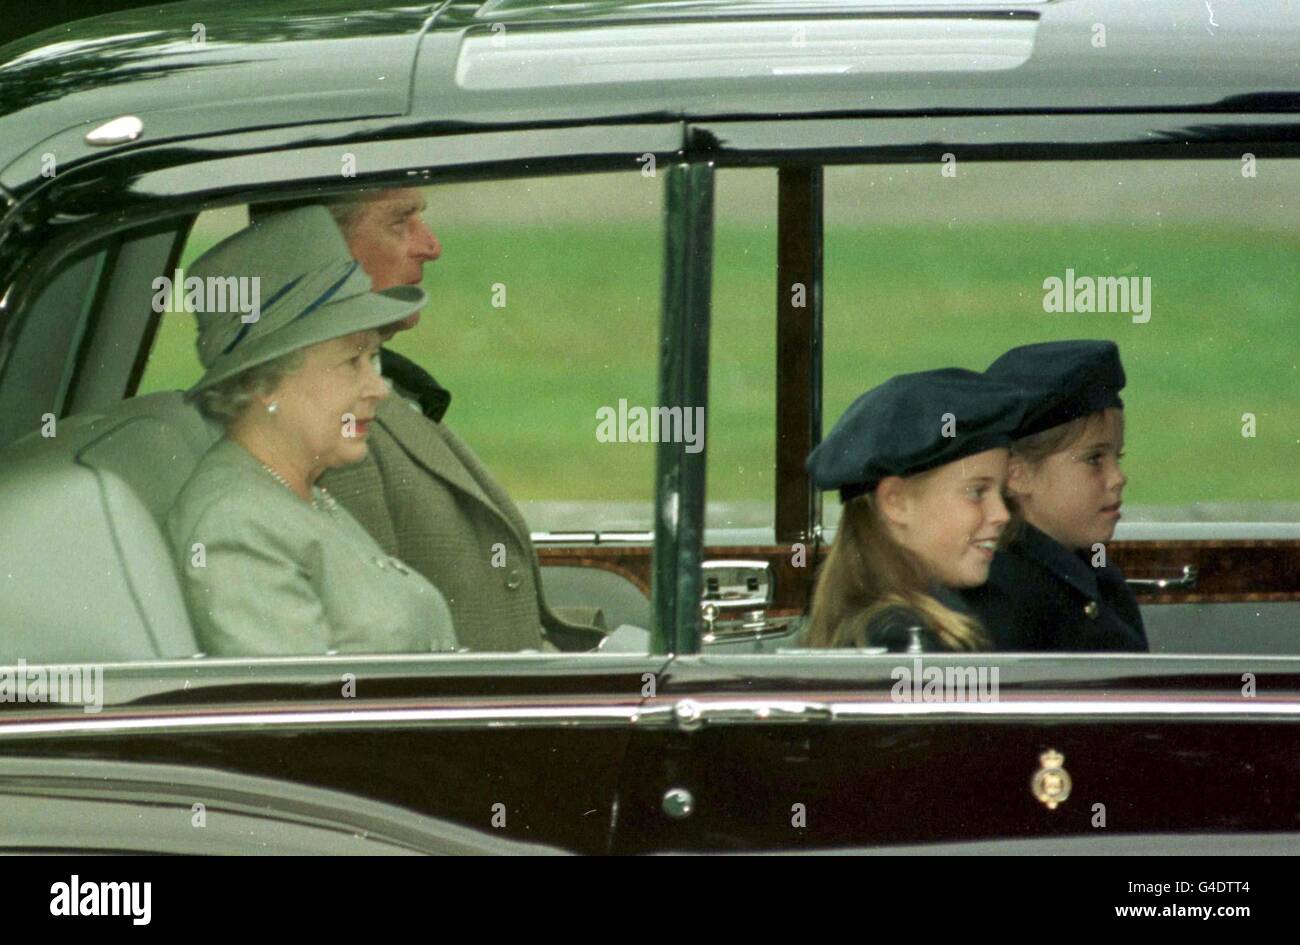 Queen Elizabeth II and Prince Philip in Balmoral Stock Photo, Royalty ...